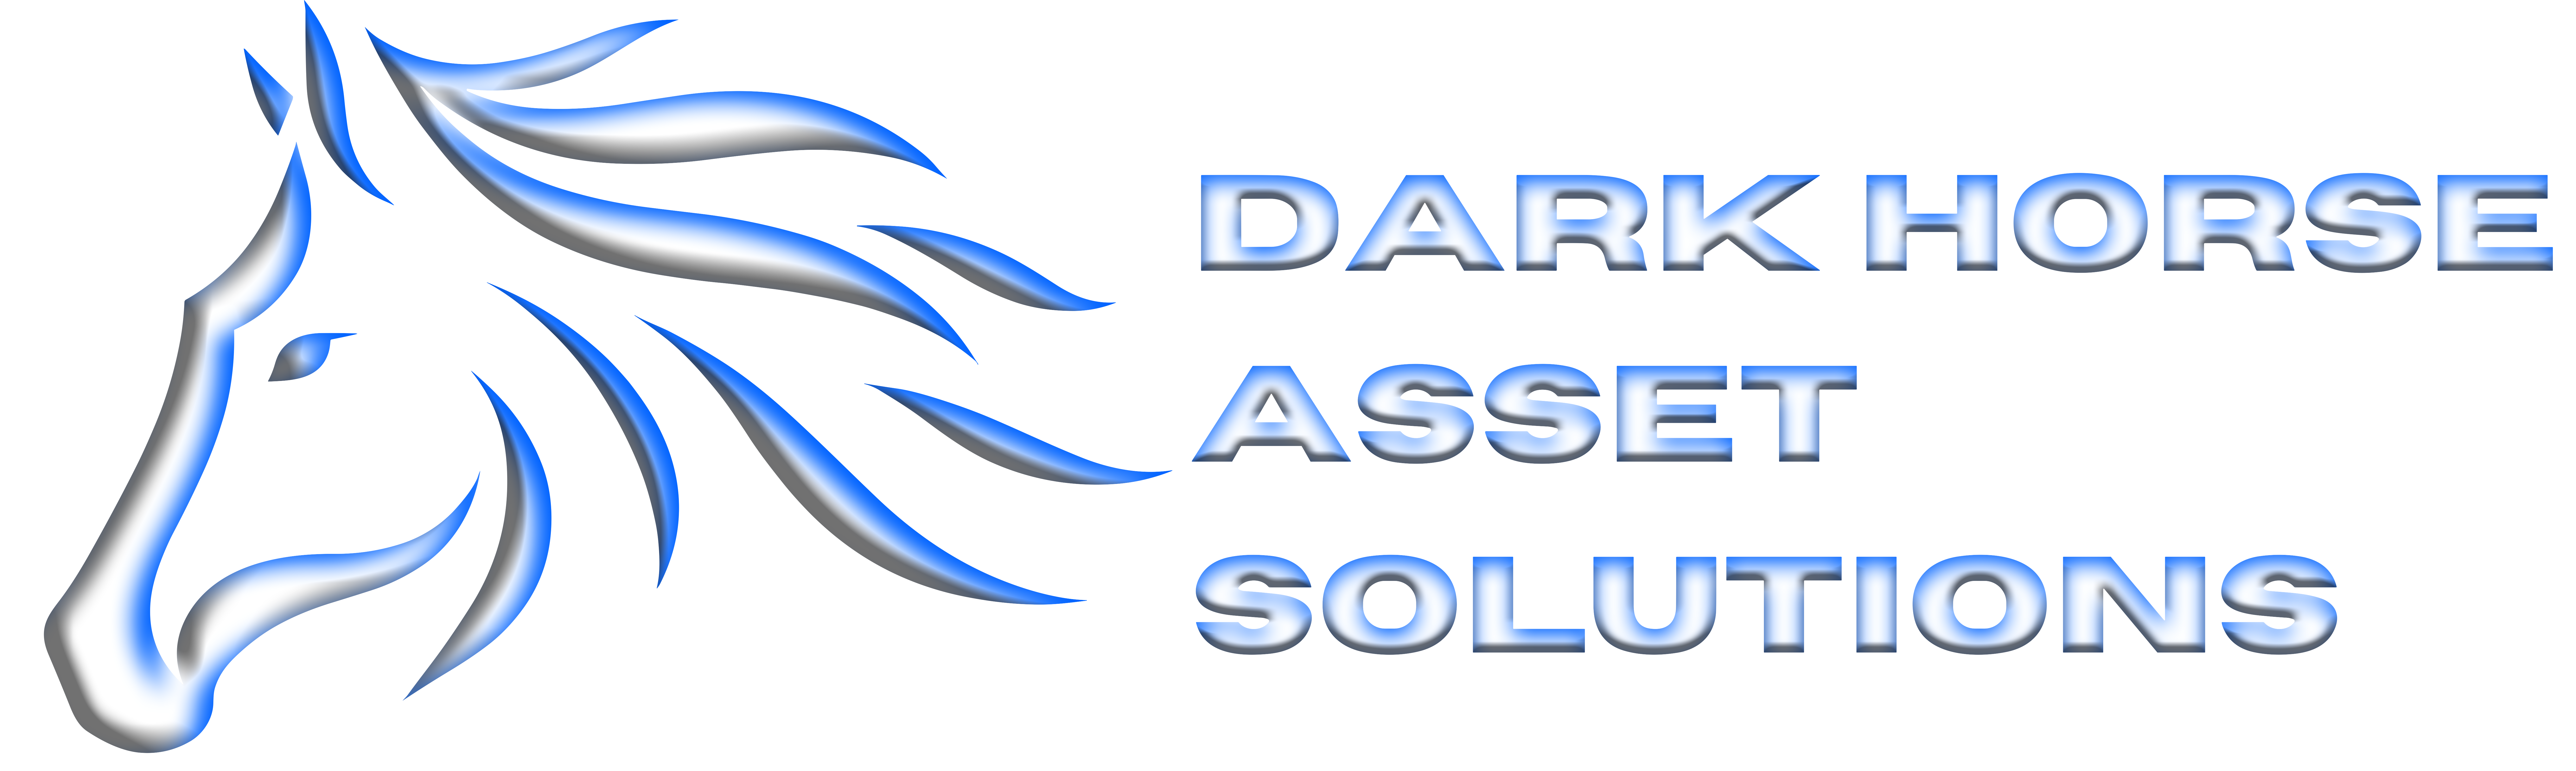 Dark Horse Asset Solutions logo - A silhouette of a strong and confident dark horse, symbolizing resilience and success in real estate investing and redevelopment.